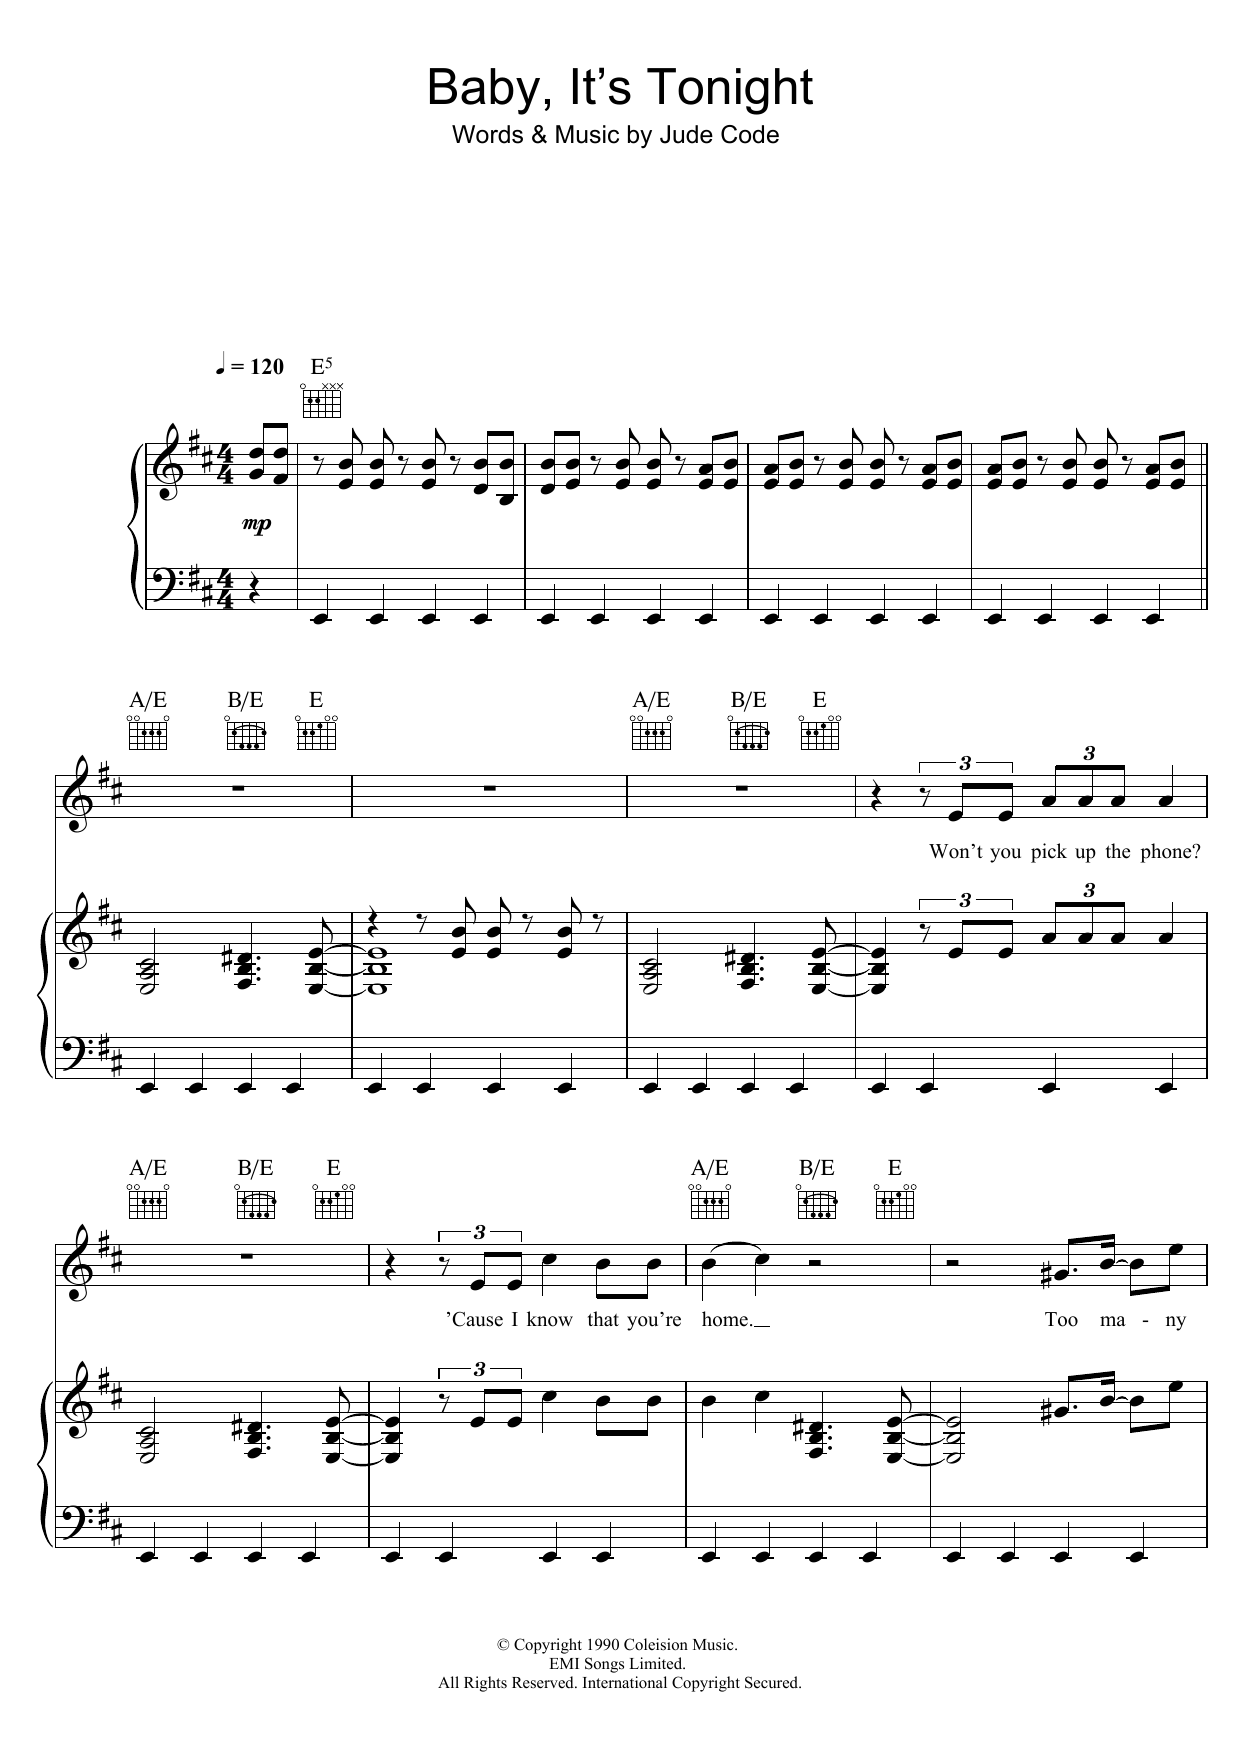 Download Jude Cole Baby, It's Tonight Sheet Music